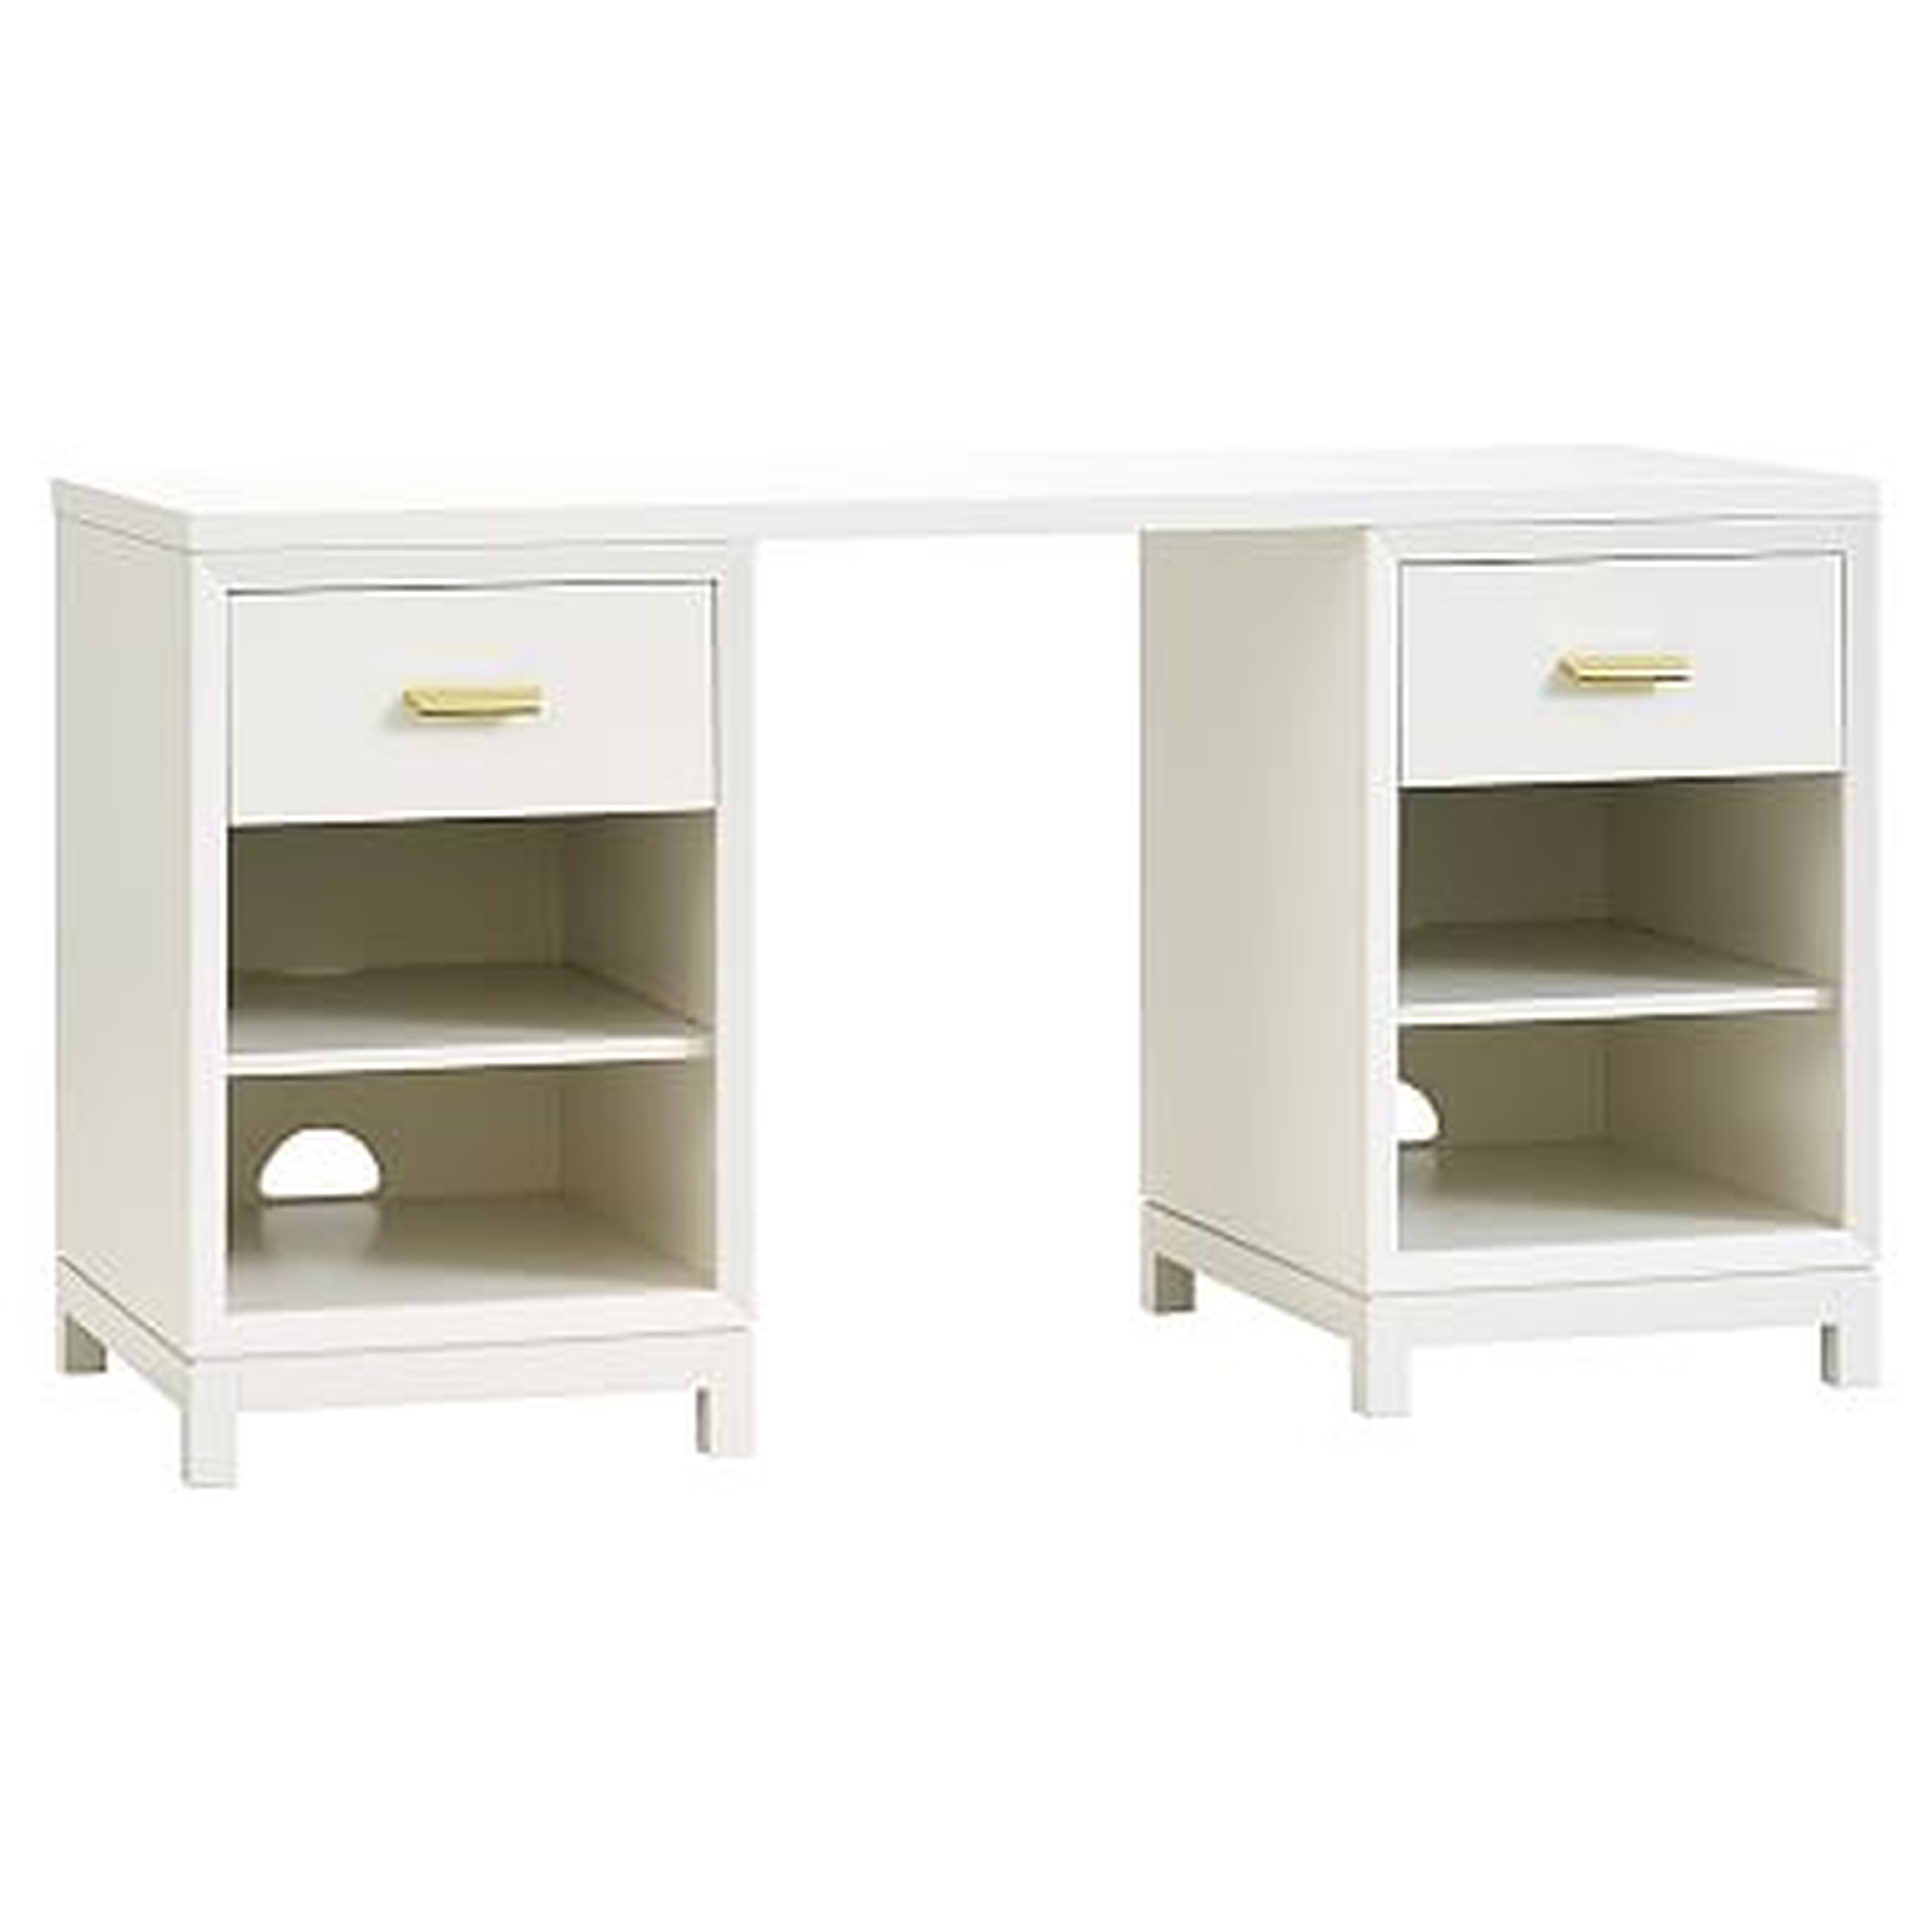 Rowan Cubby Storage Desk, Lacquer Simply White - Pottery Barn Teen